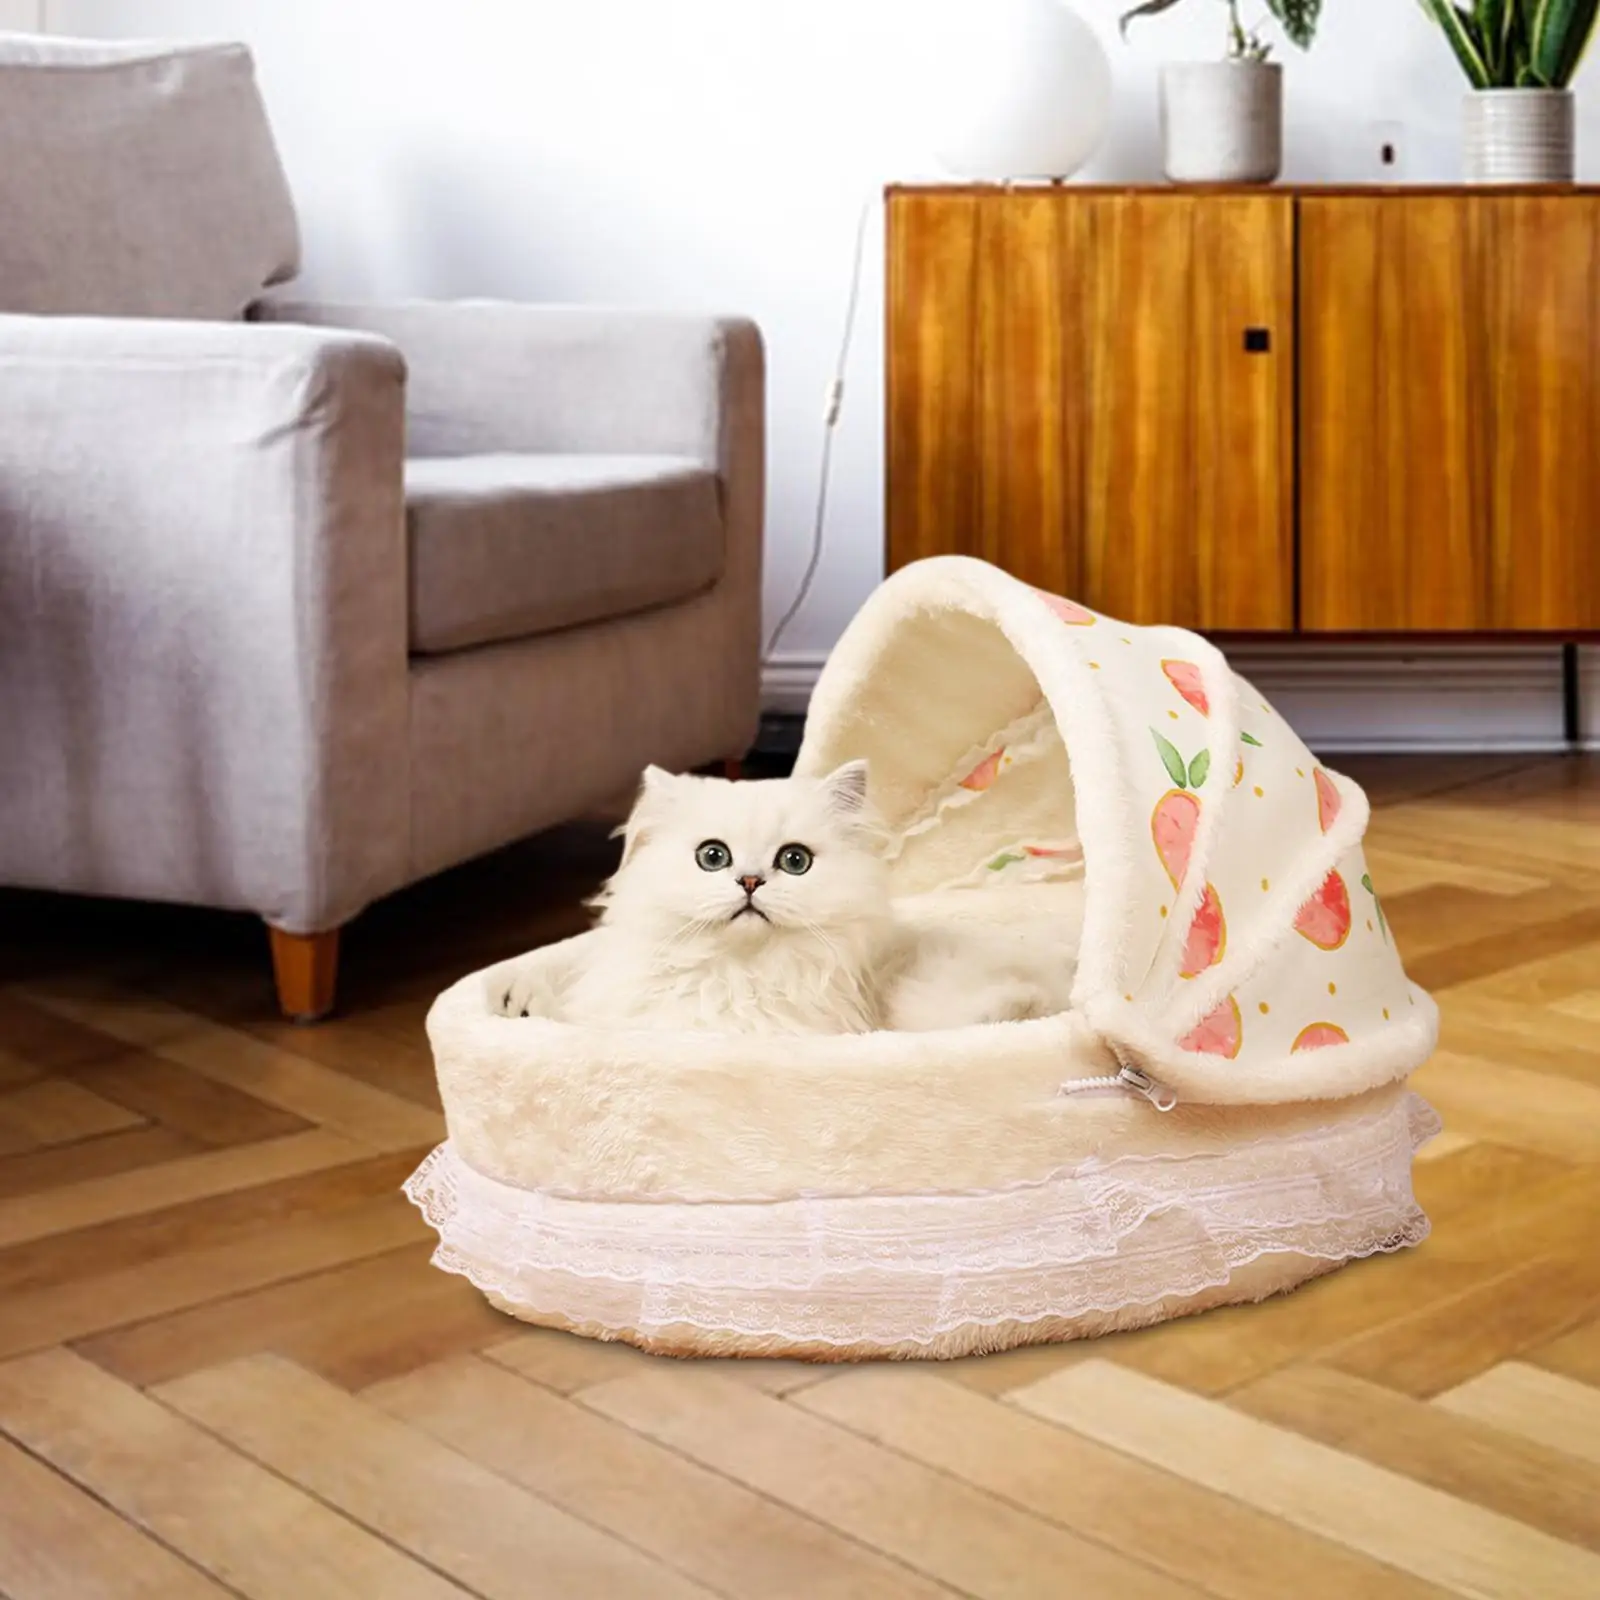 Hooded Warm Pet House Dog Tent Self Warming Nonslip Bottom Soft Blanket Hut Cave Cat Bed for Kitty Small Animals Puppy Sleeping